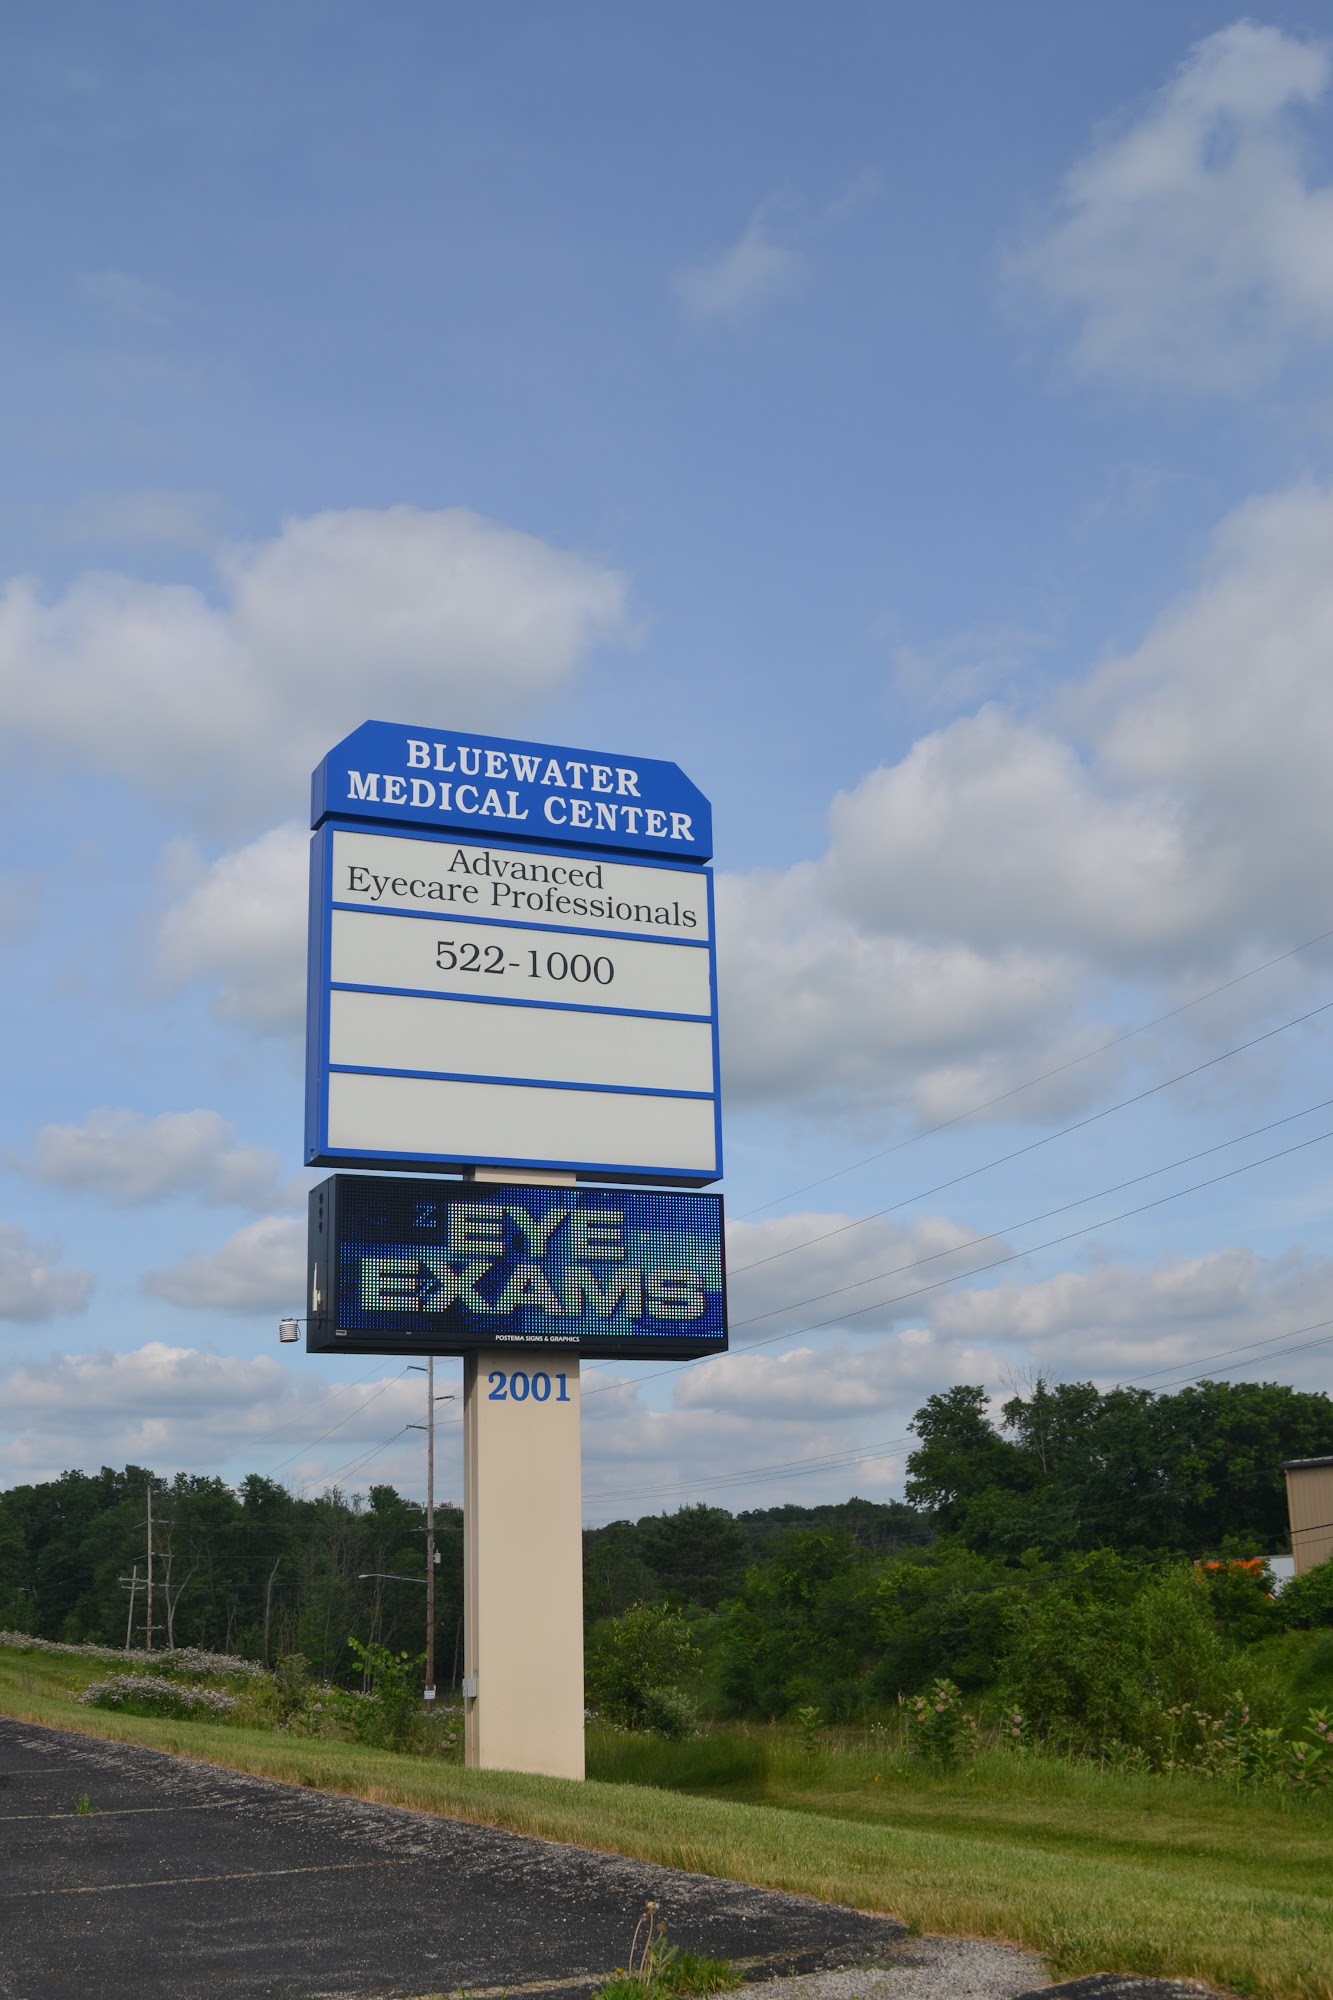 Advanced Eyecare Professionals 2001 E Bluewater Hwy, Ionia Michigan 48846